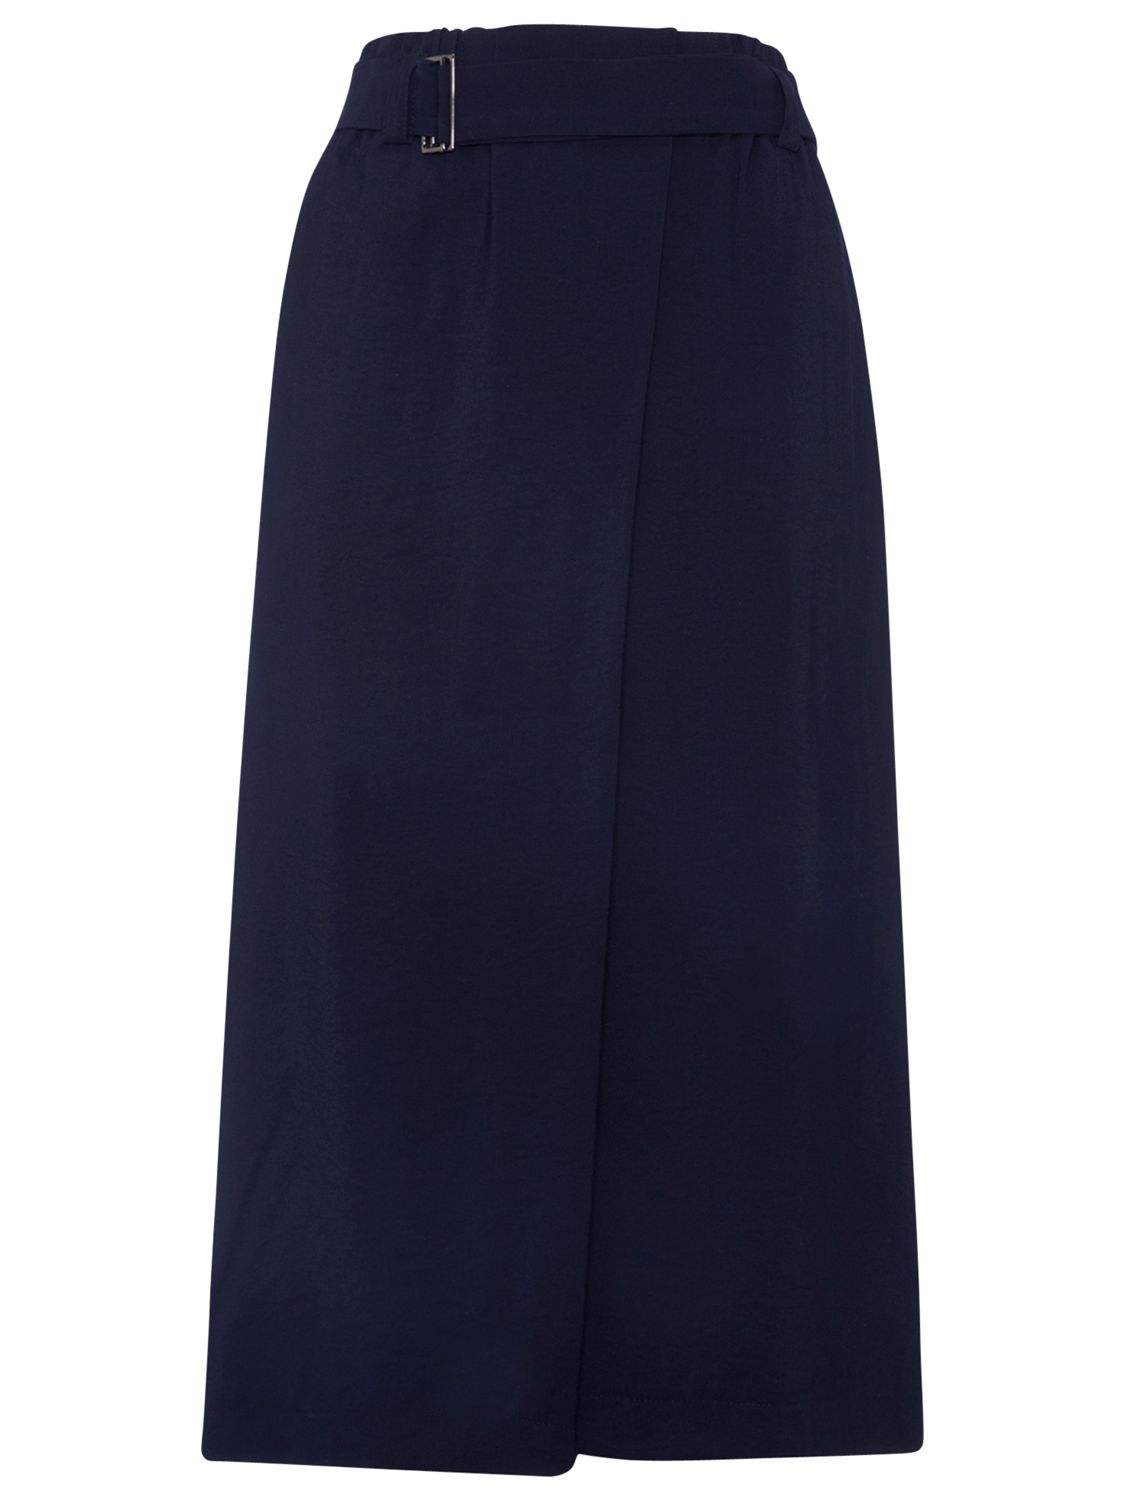 Buy Whistles Casual Wrap Culottes | John Lewis